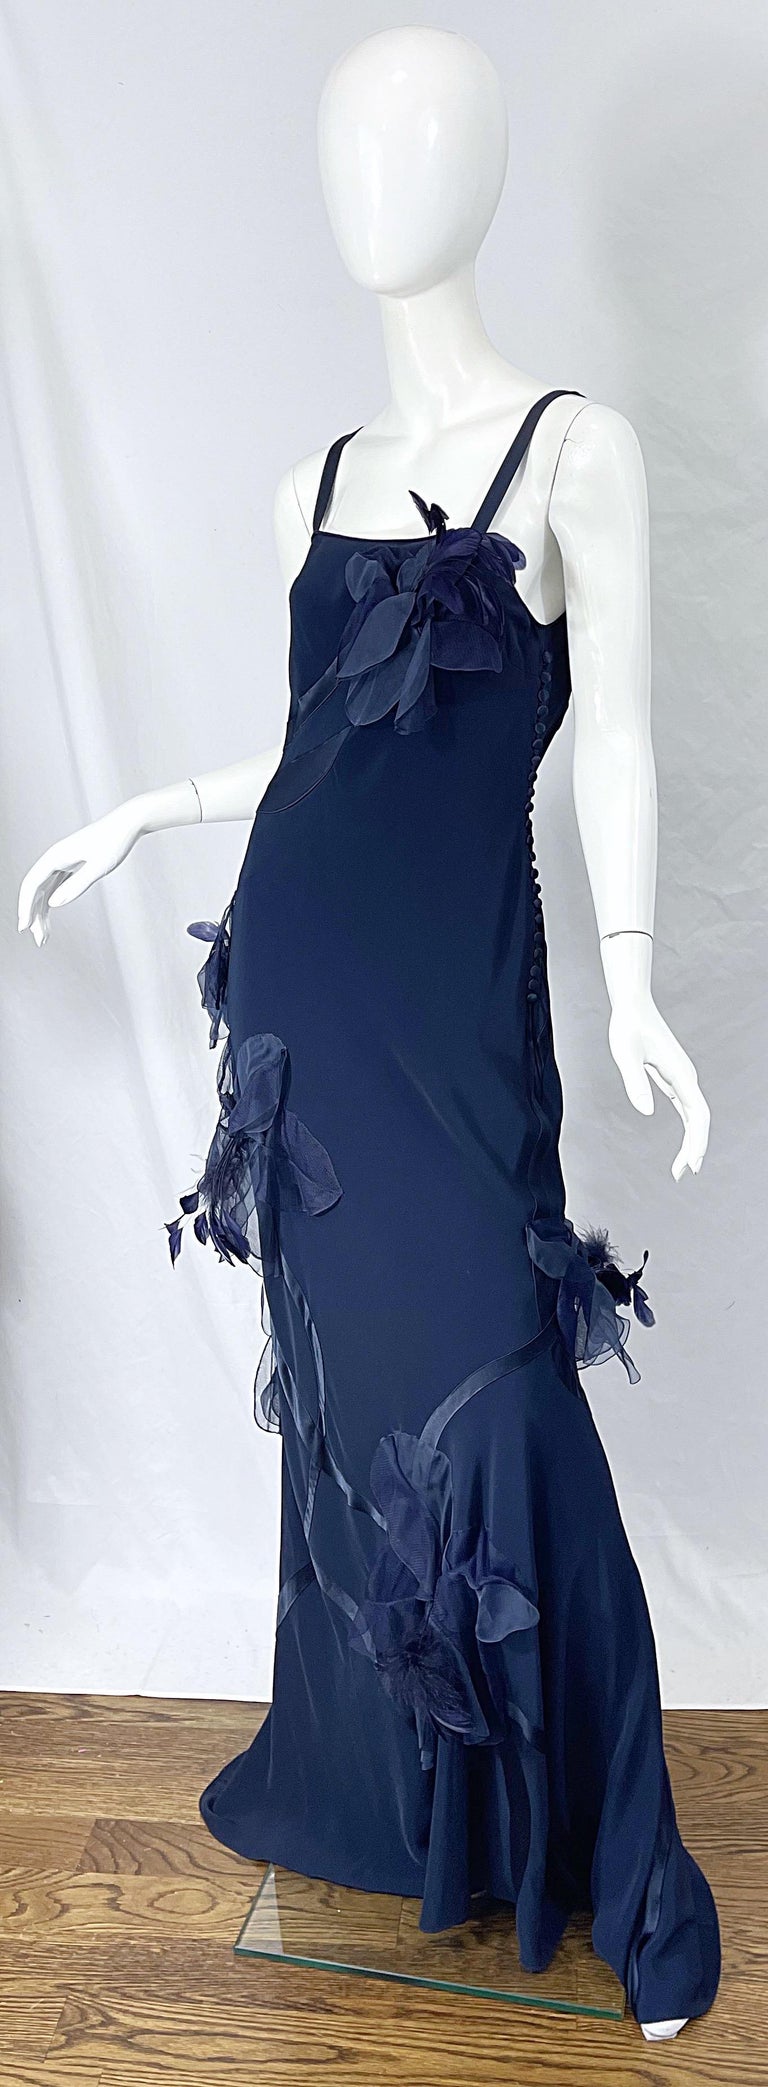 NWT John Galliano Size 10 Early 2000s Navy Blue Feather Silk / Satin Gown Dress For Sale 1